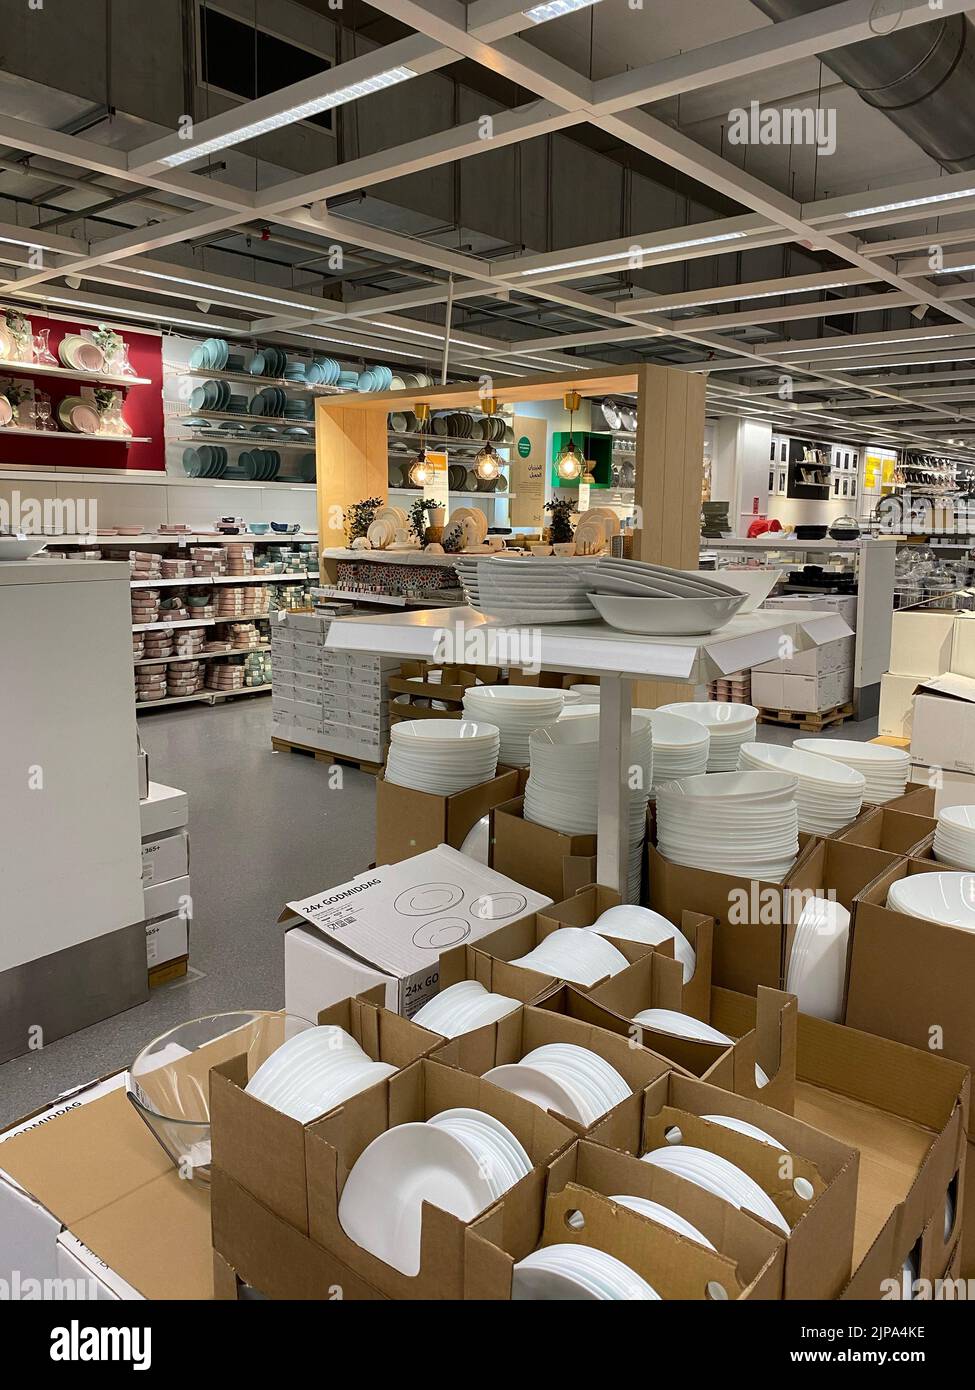 The interior of IKEA Casablanca furniture and goods warehouse area for Logistic Stock Photo